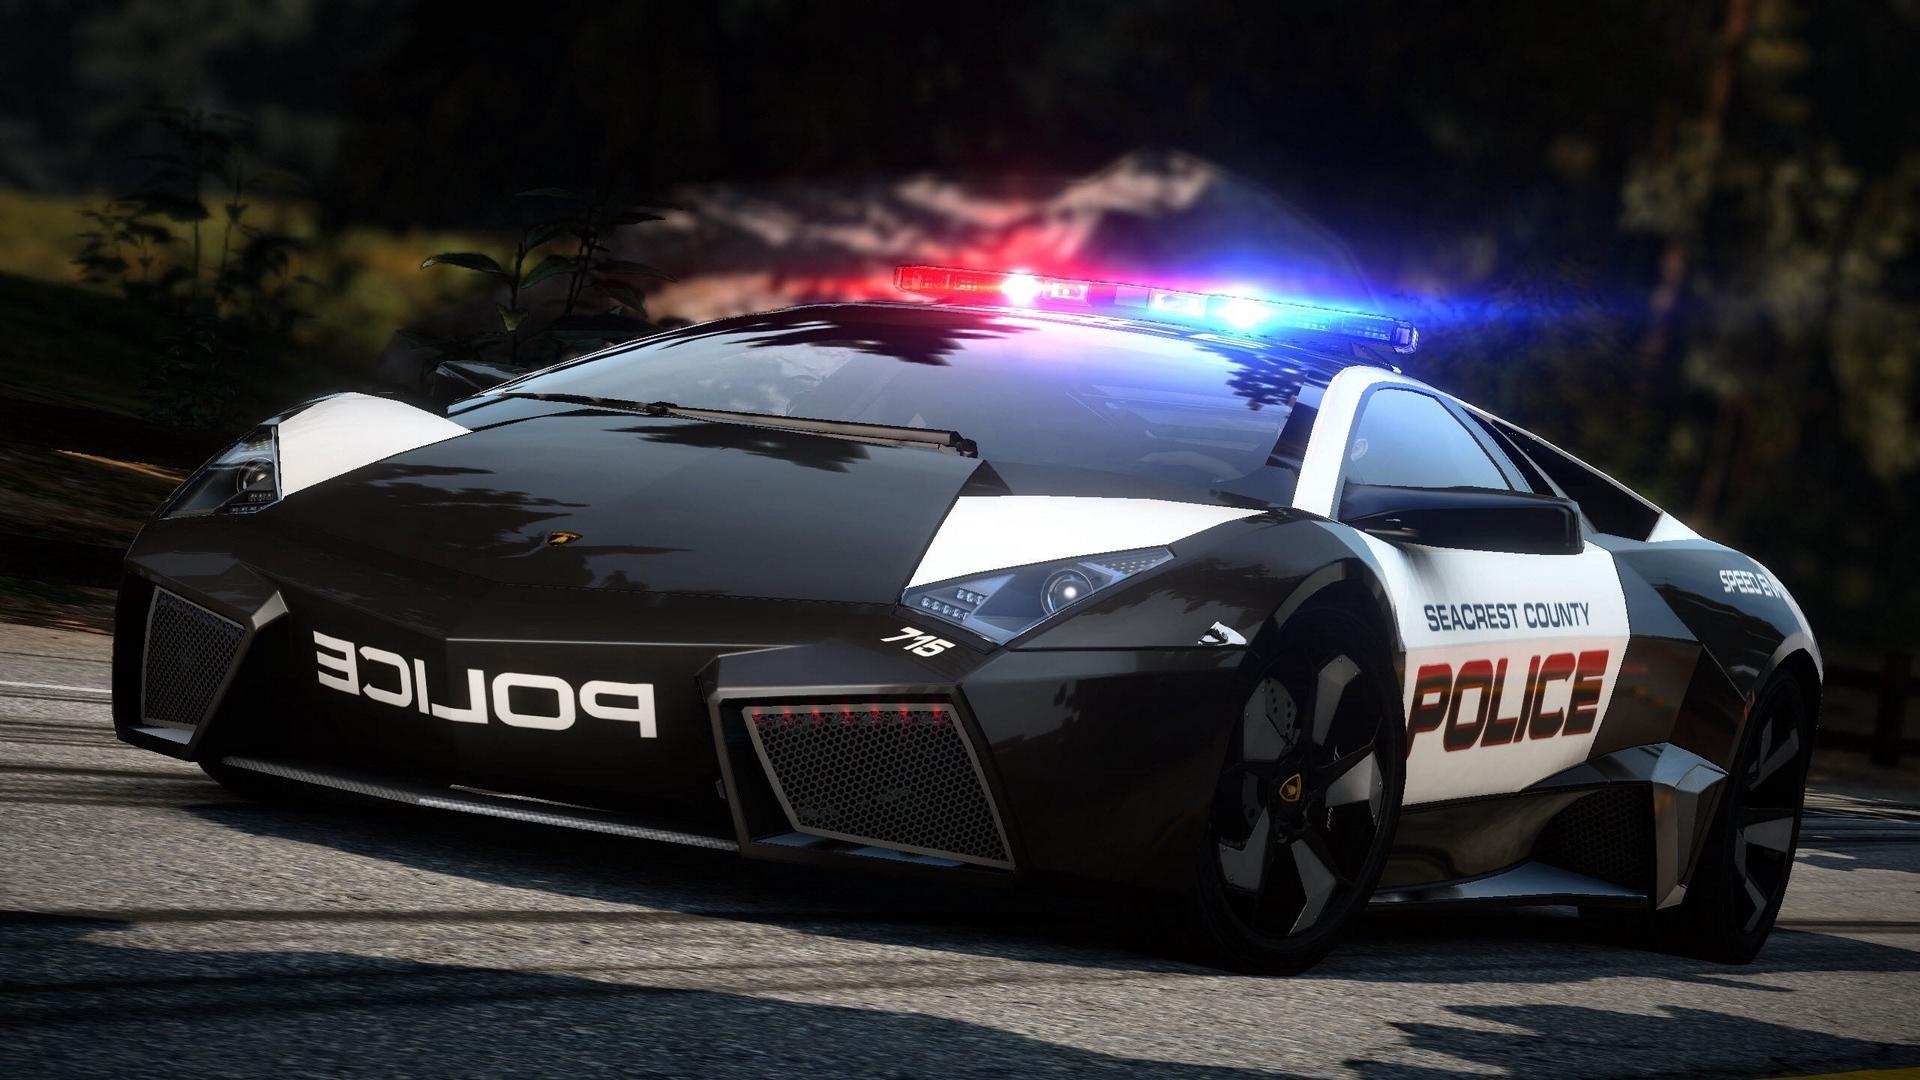 Download wallpaper 1920x1080 nfs, need for speed, police